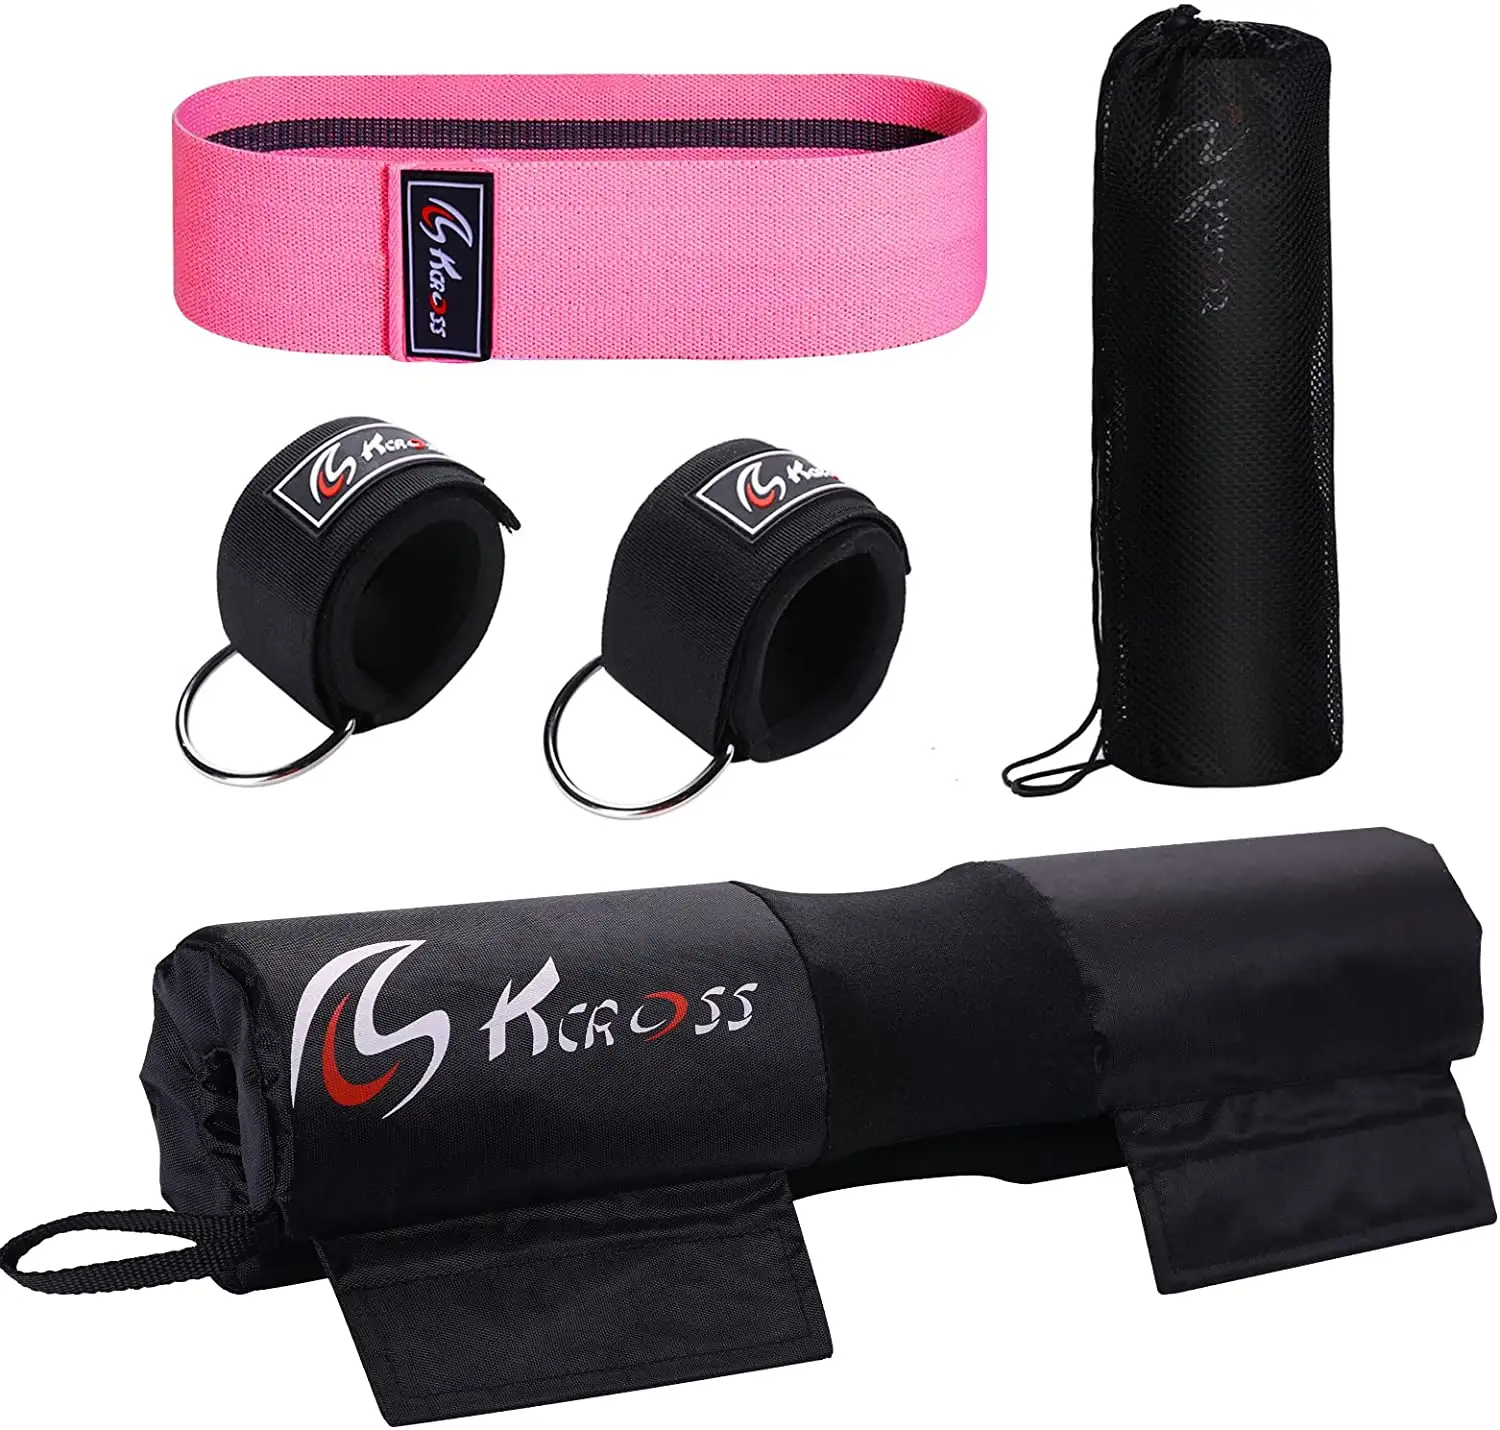 Lumia Fitness 7 Piece Glute Workout Kit Barbell Squat Pad, 3 Fabric Resistance Bands 2 Ankle Straps Carry Bag Gym Accessories